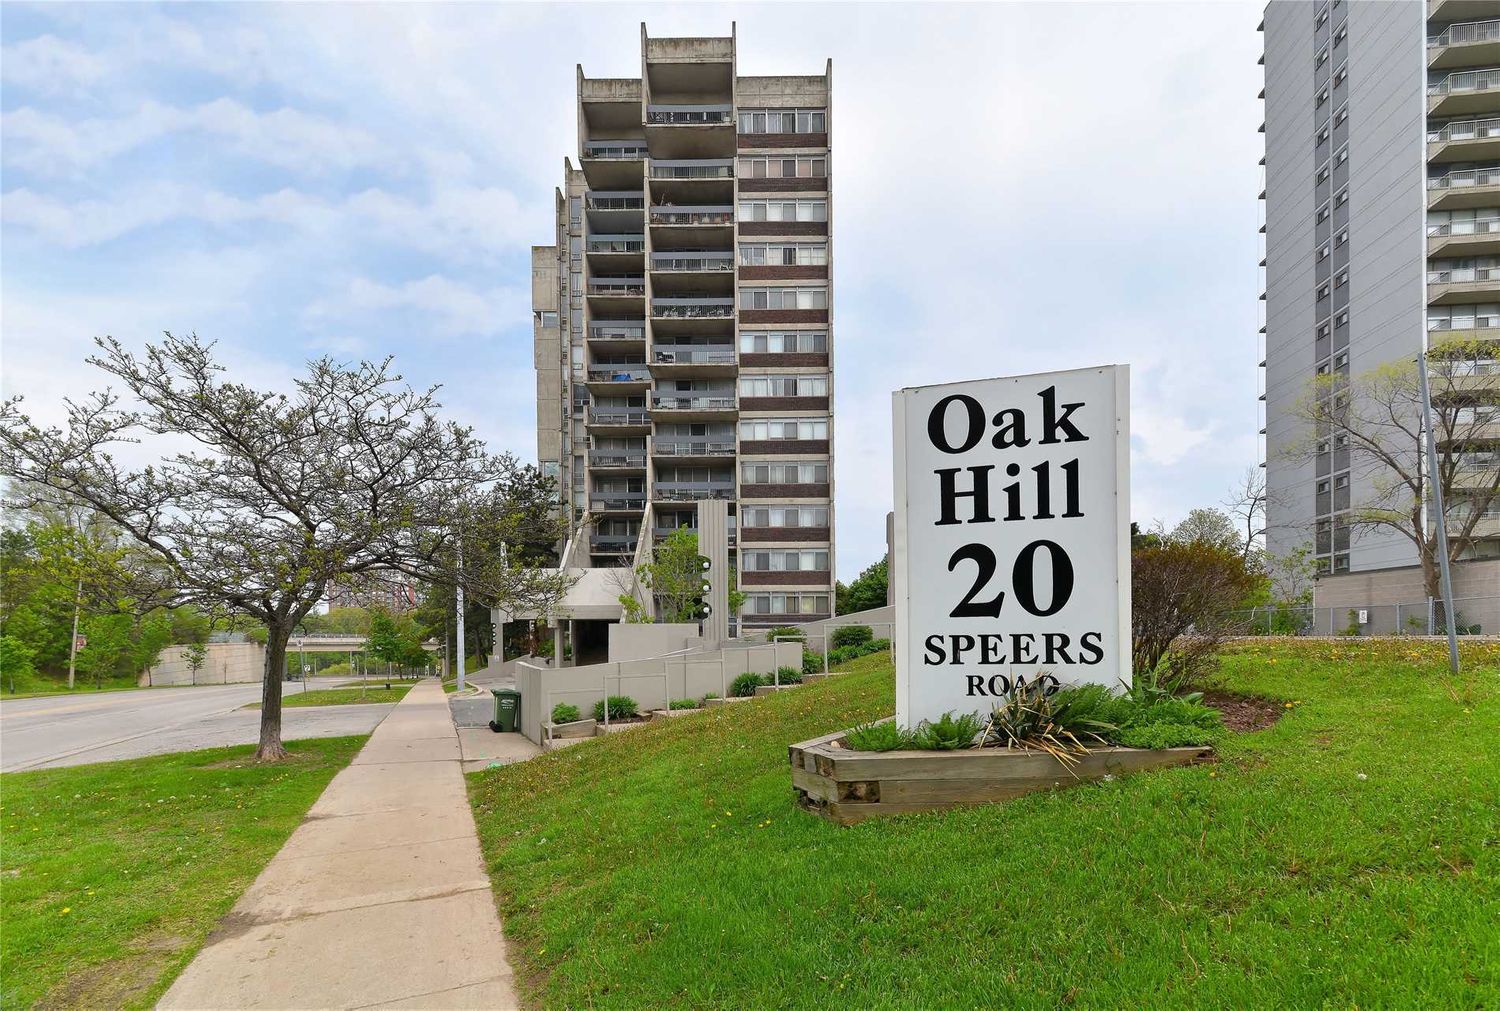 20 Speers Road. Oak Hill Condos is located in  Oakville, Toronto - image #1 of 3